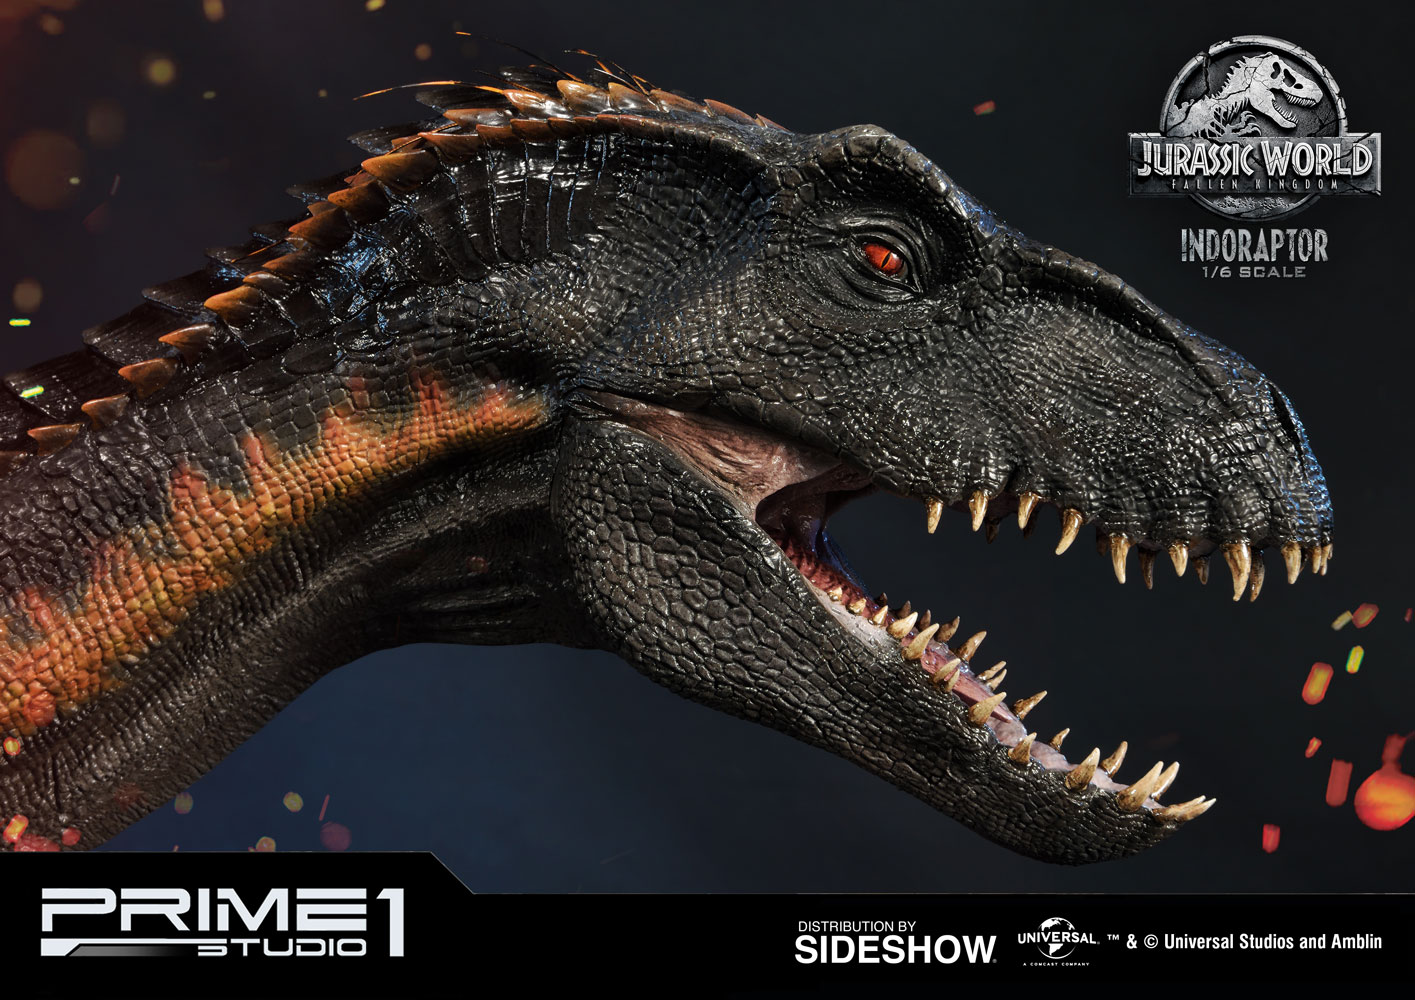 Indoraptor Statue by Prime 1 | Sideshow Collectibles